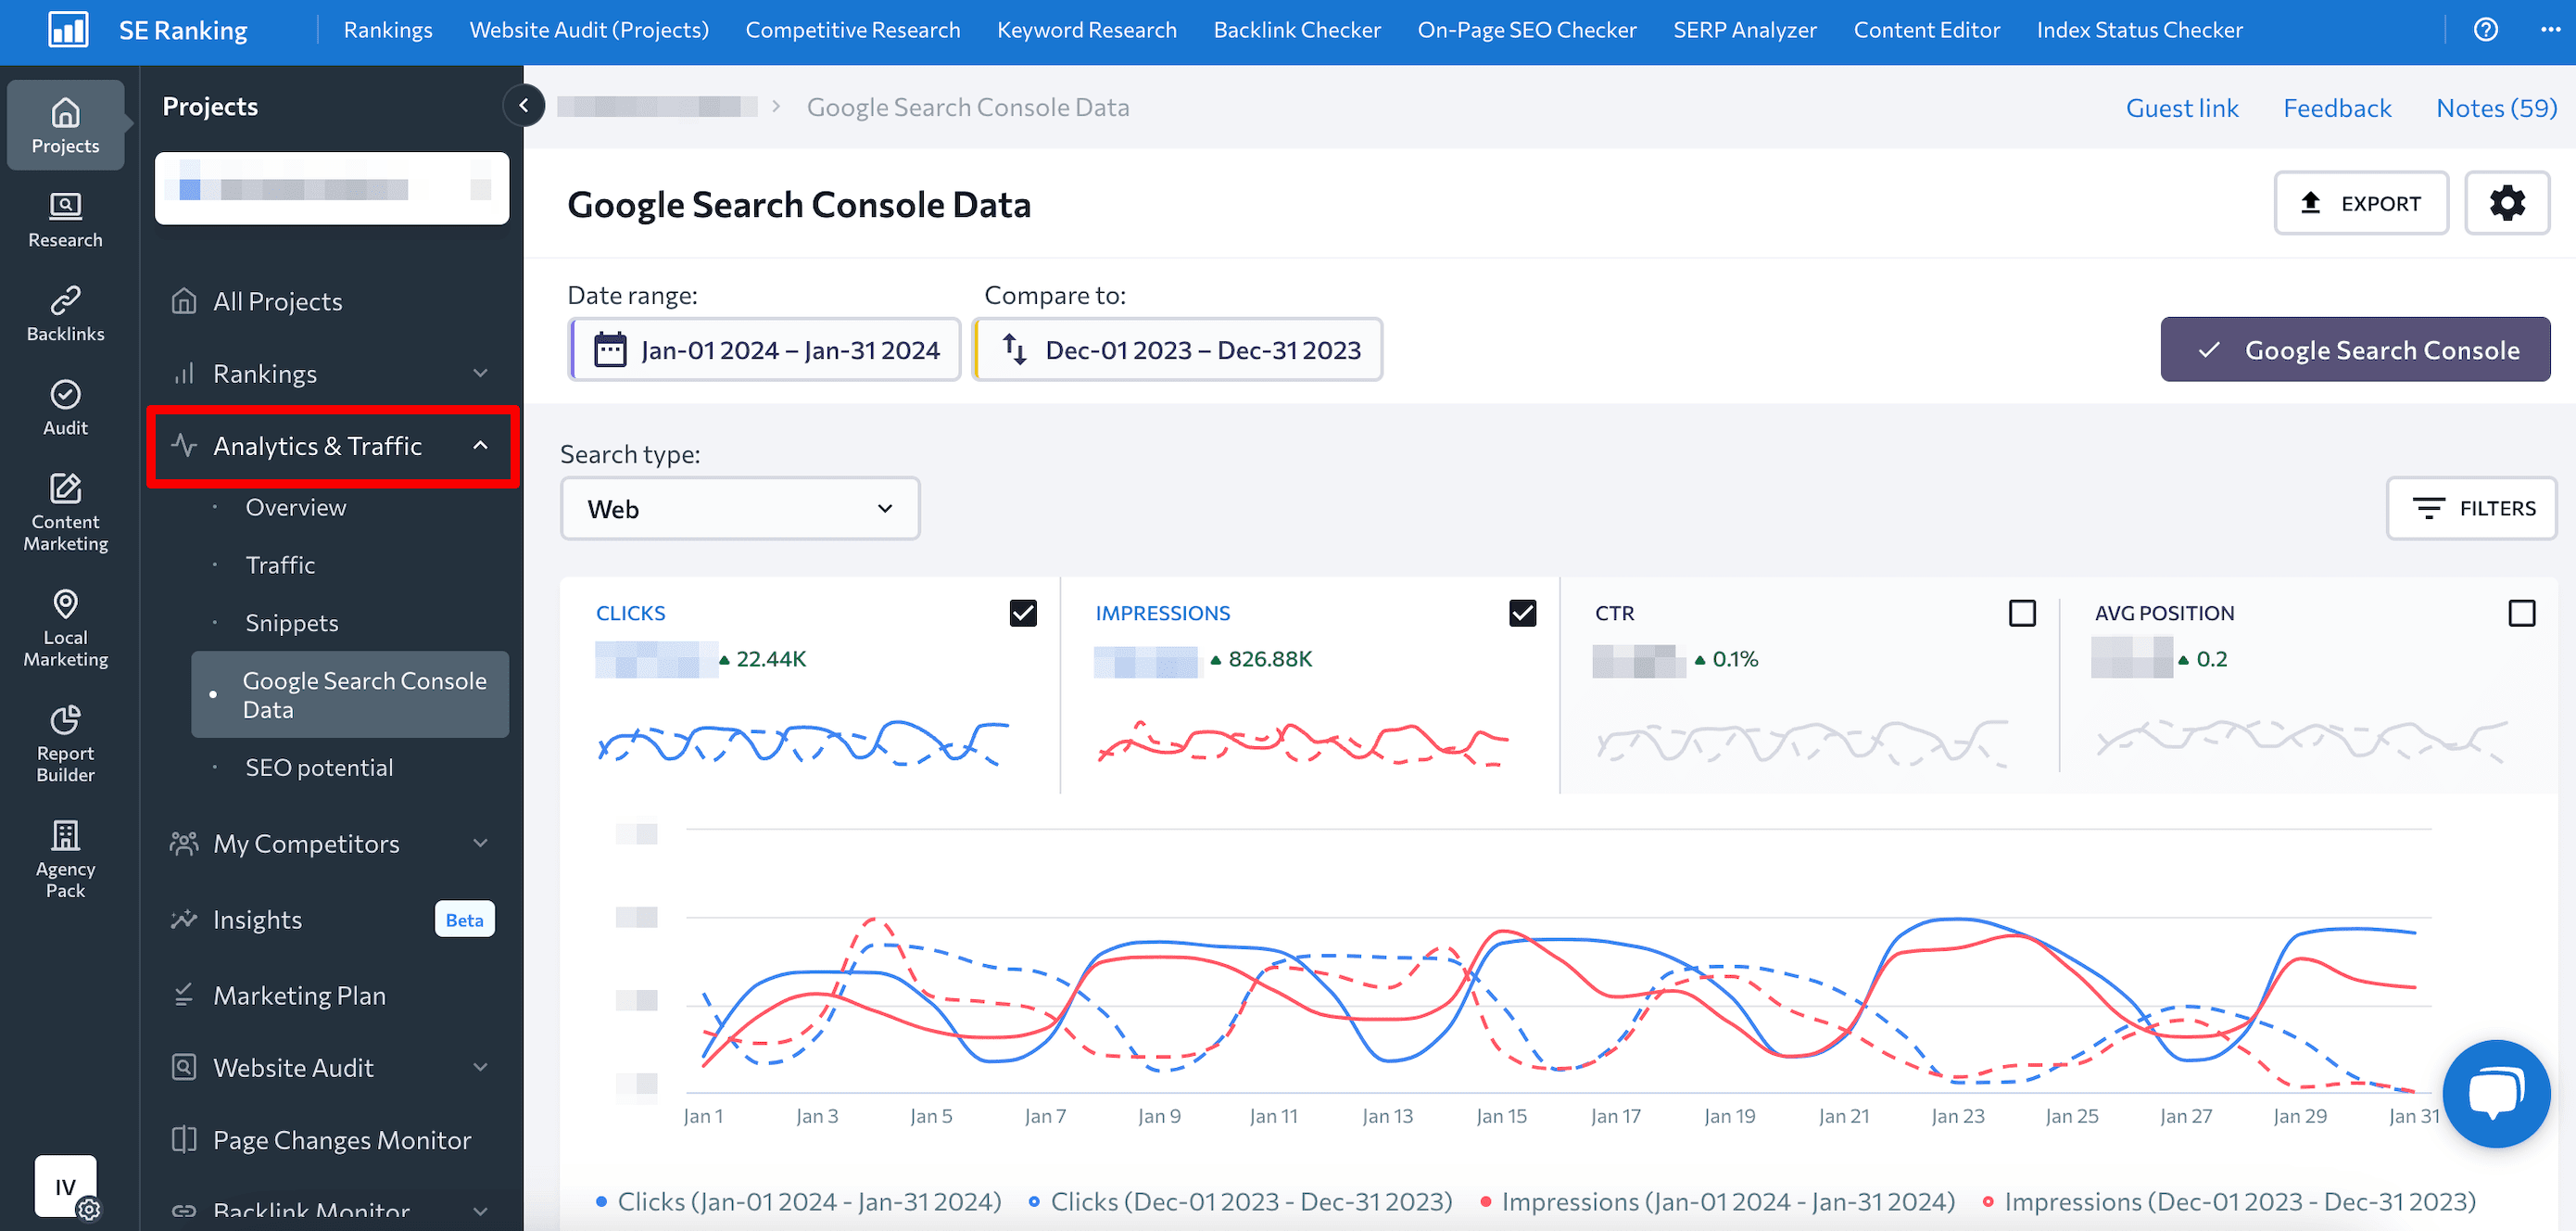 Analytics and Traffic section in SE Ranking